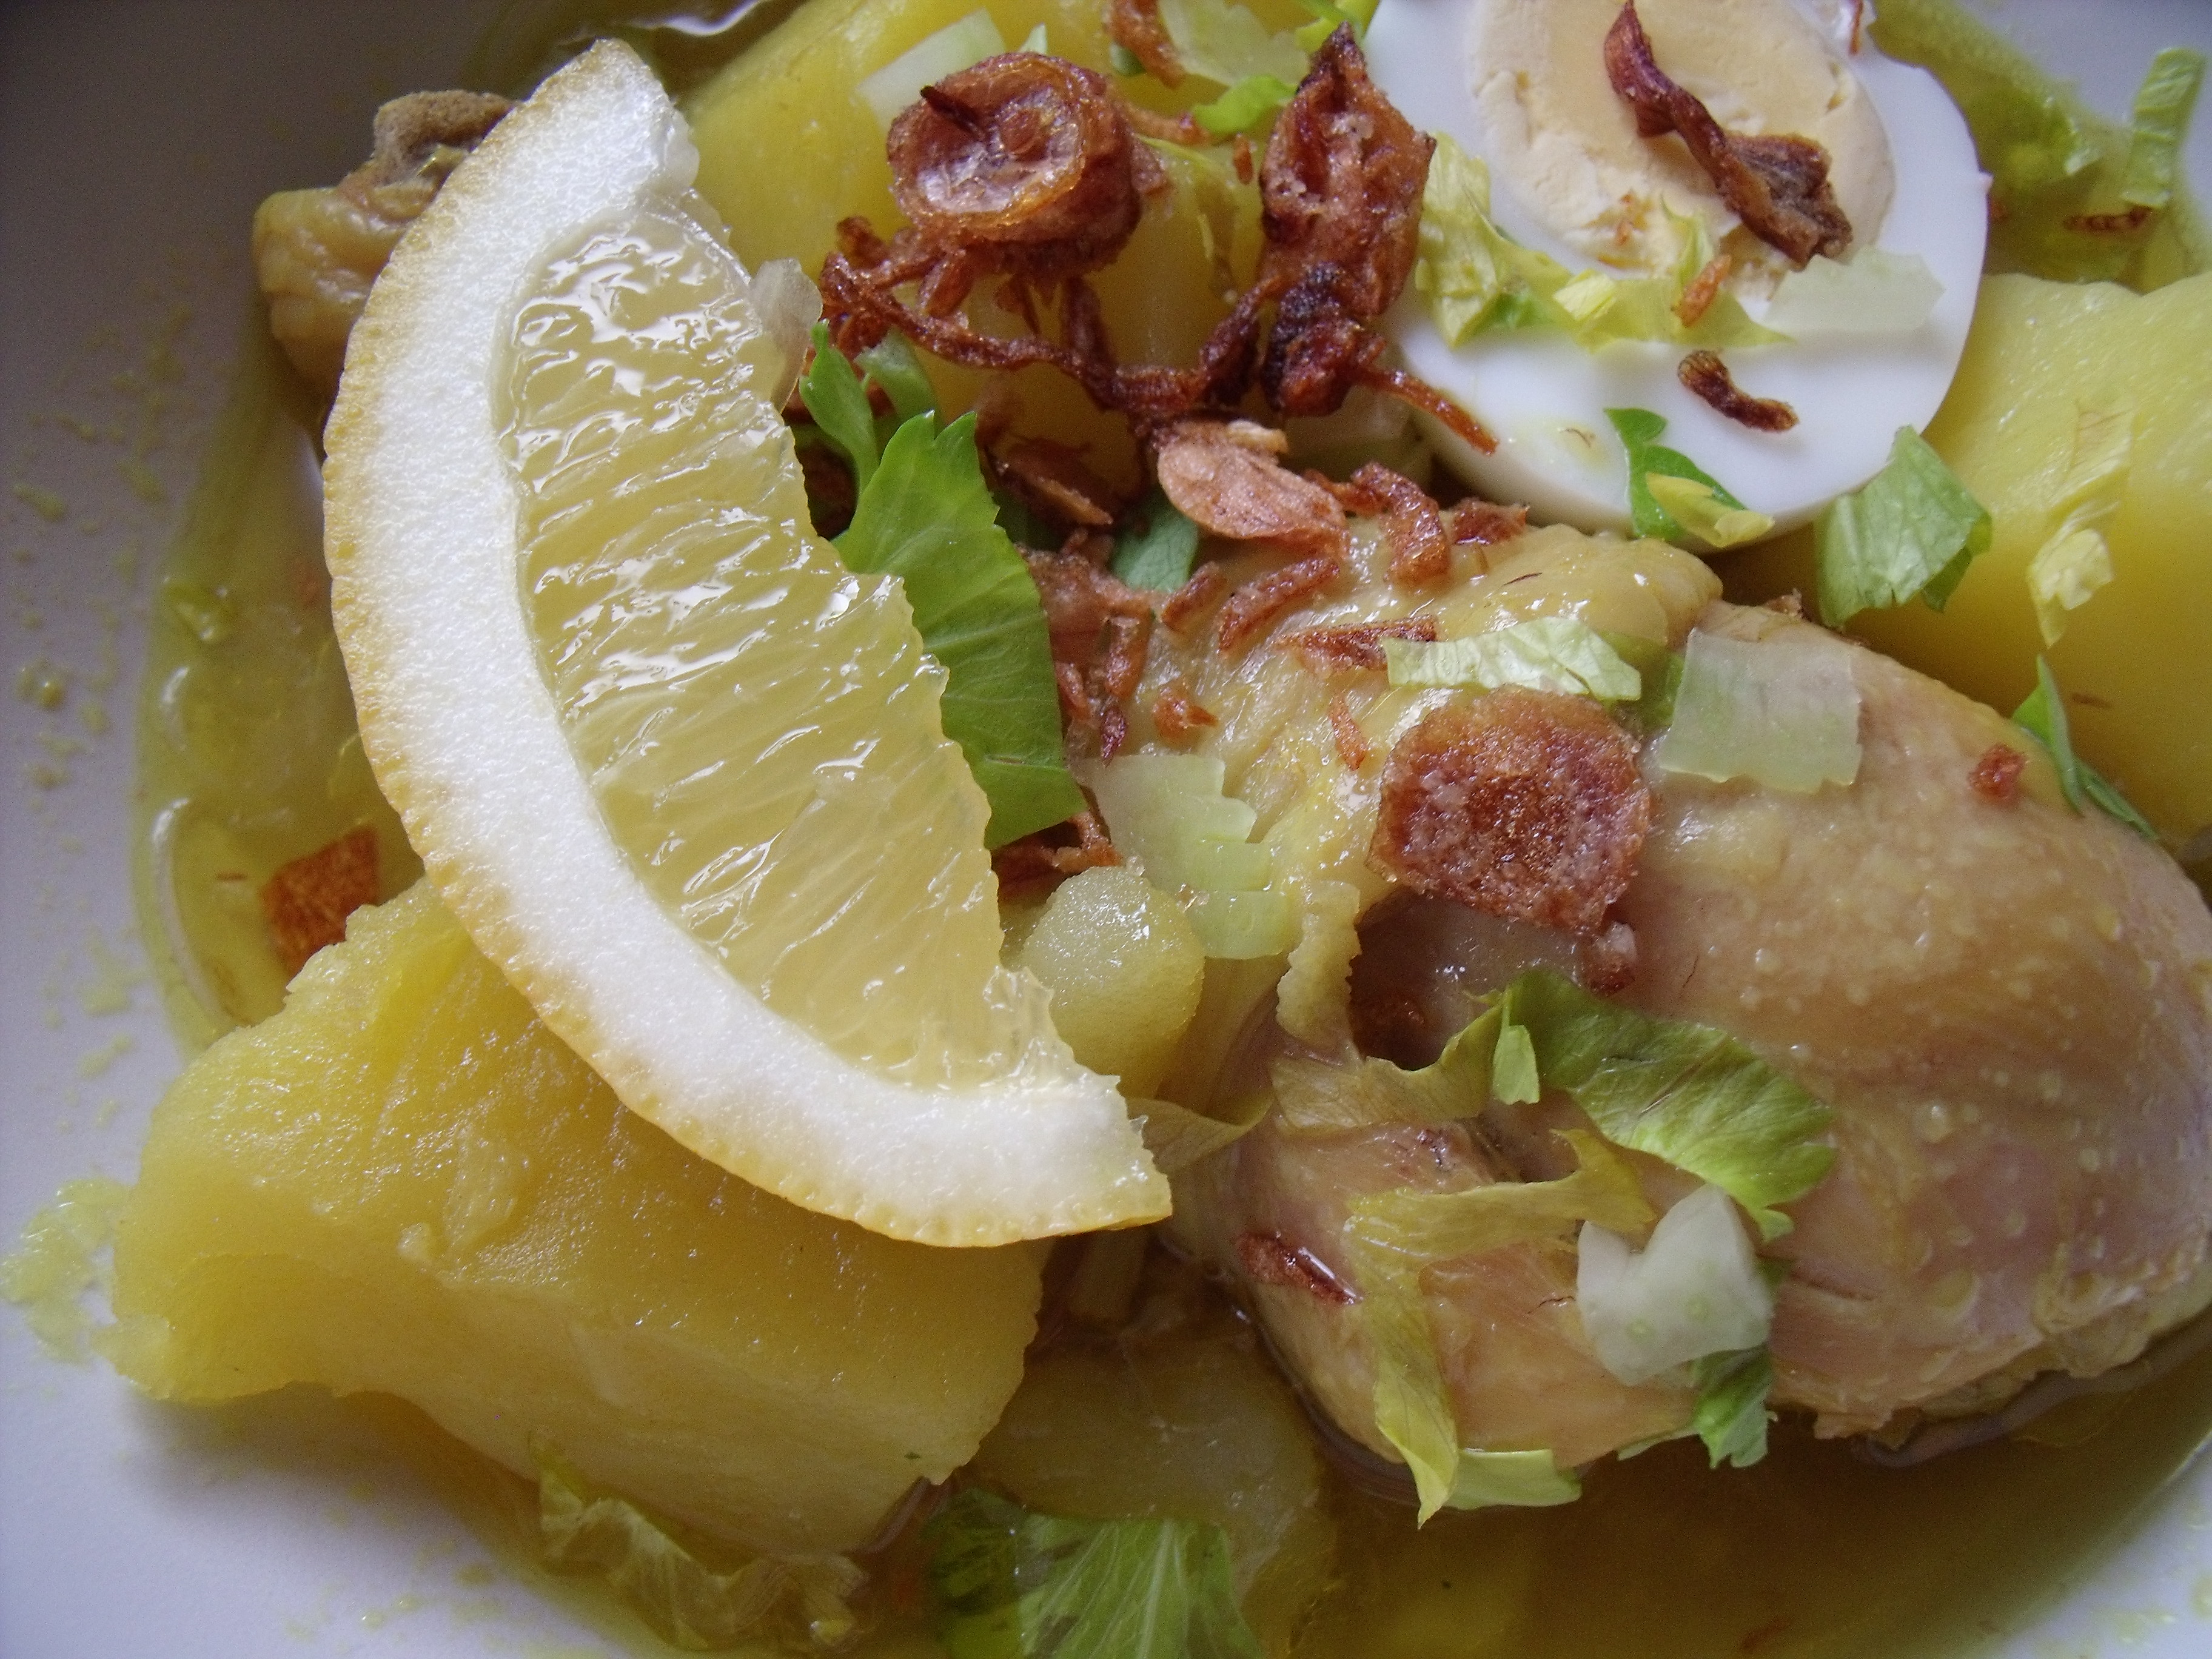 Quick and easy soto ayam recipe - Wil and Wayan's Bali Kitchen